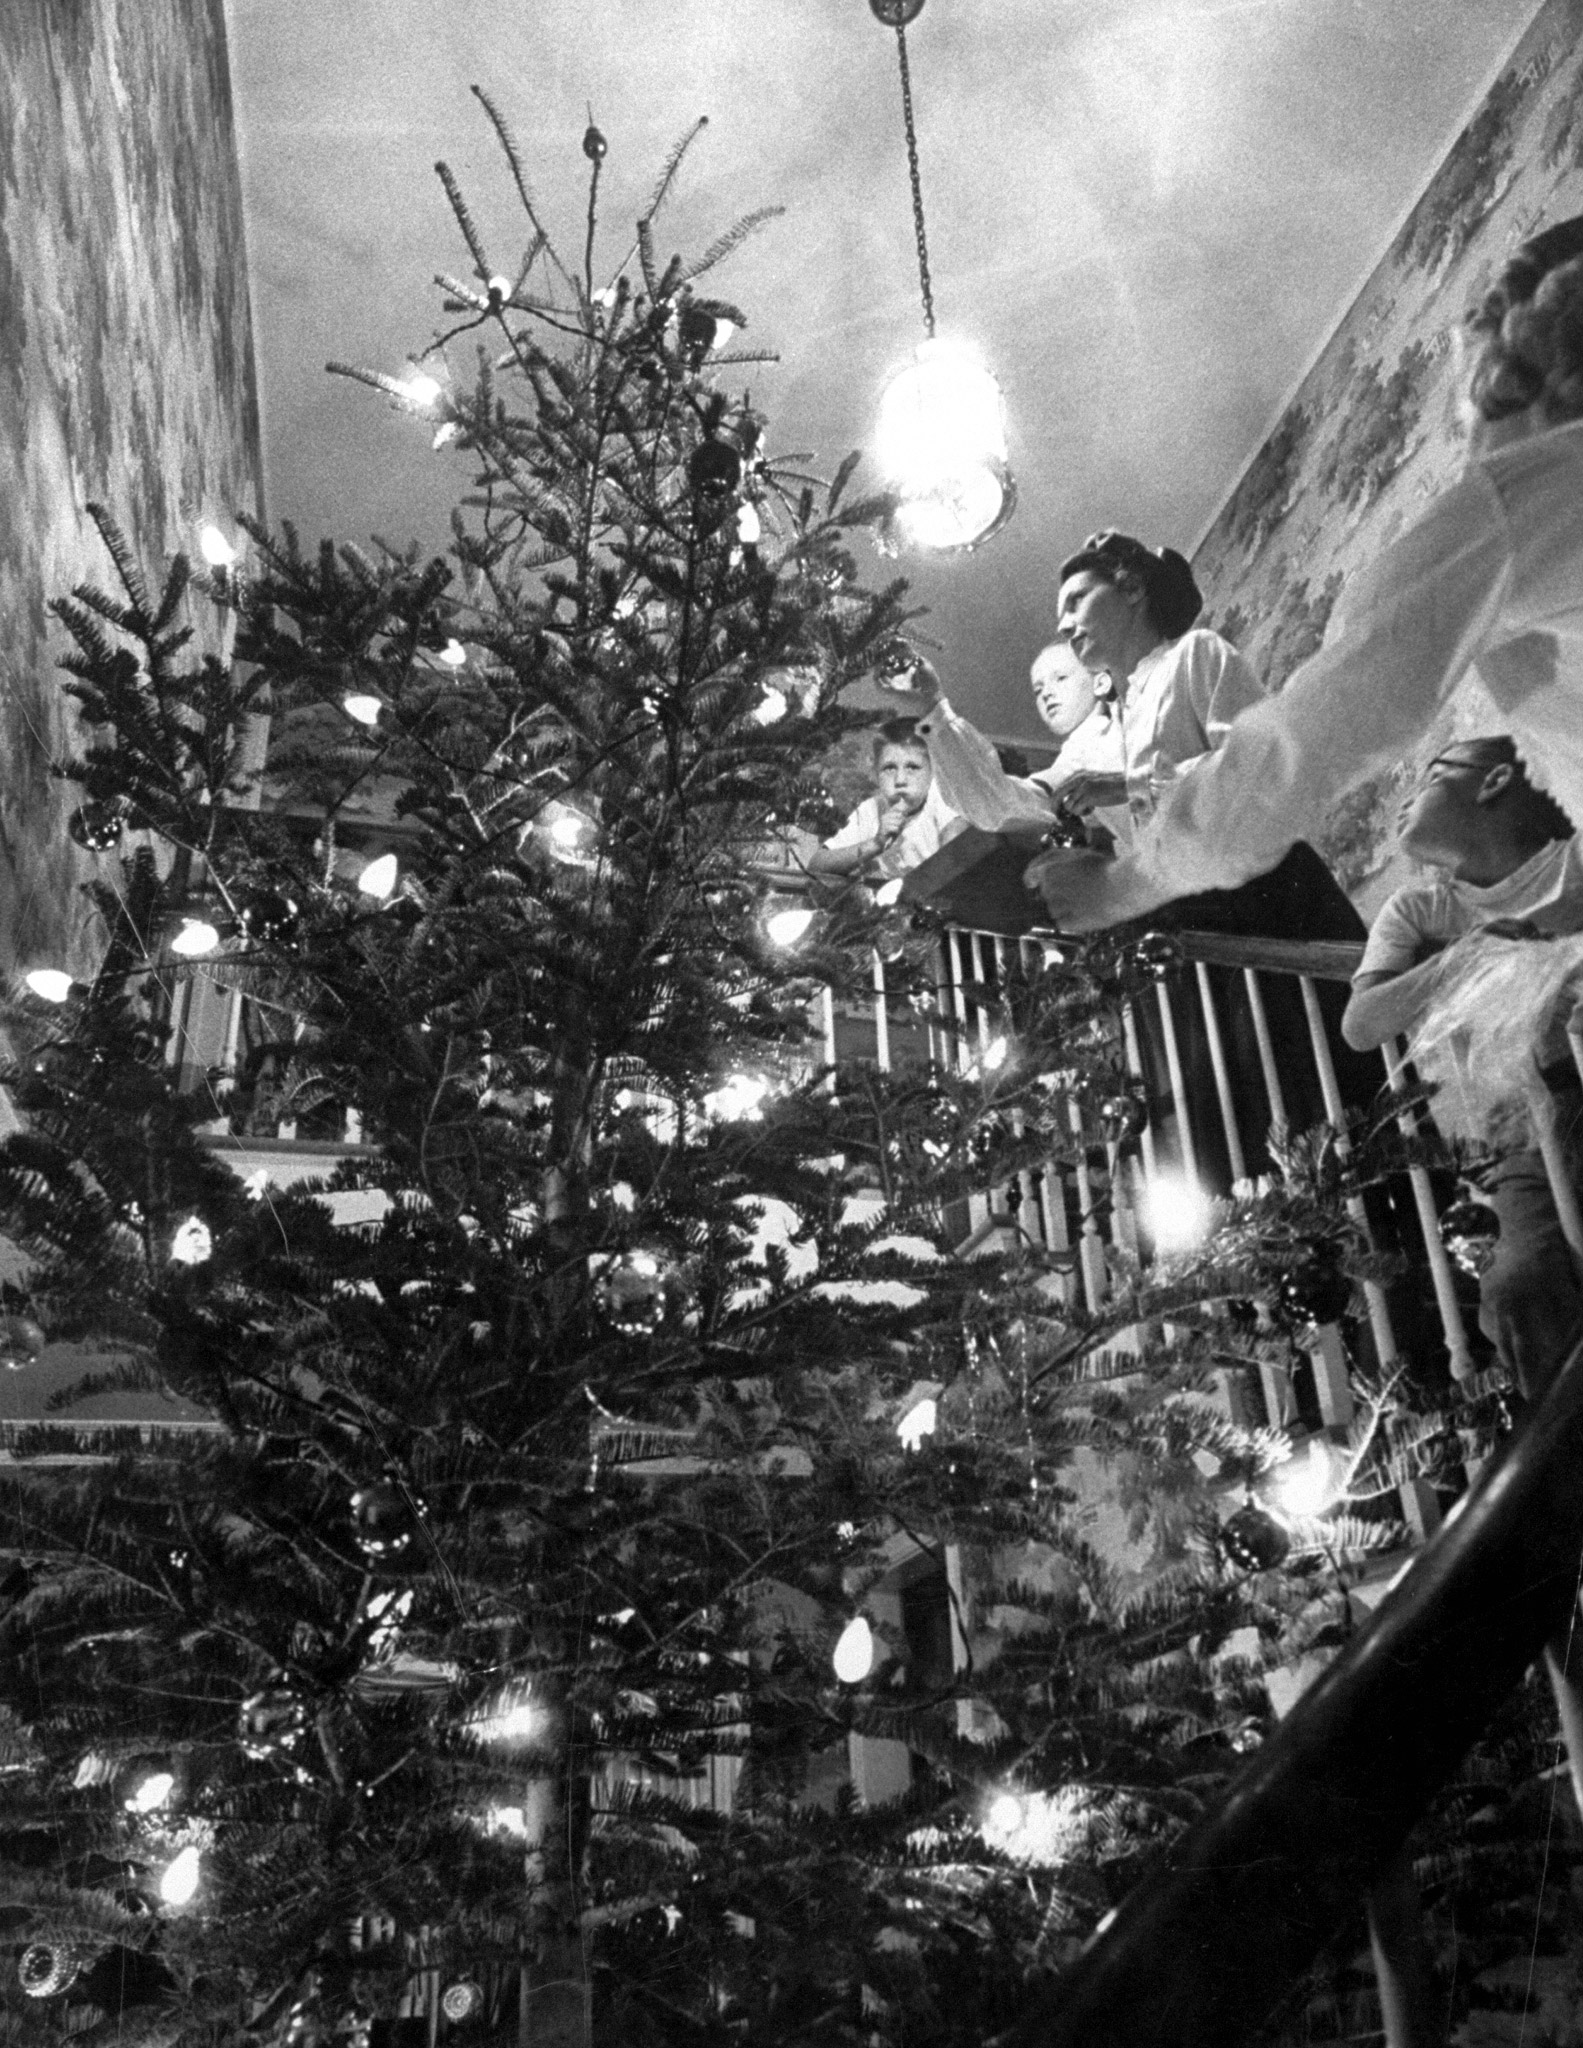 Mrs. George Sutton and her family decorating their Christmas tree at home, 1956.